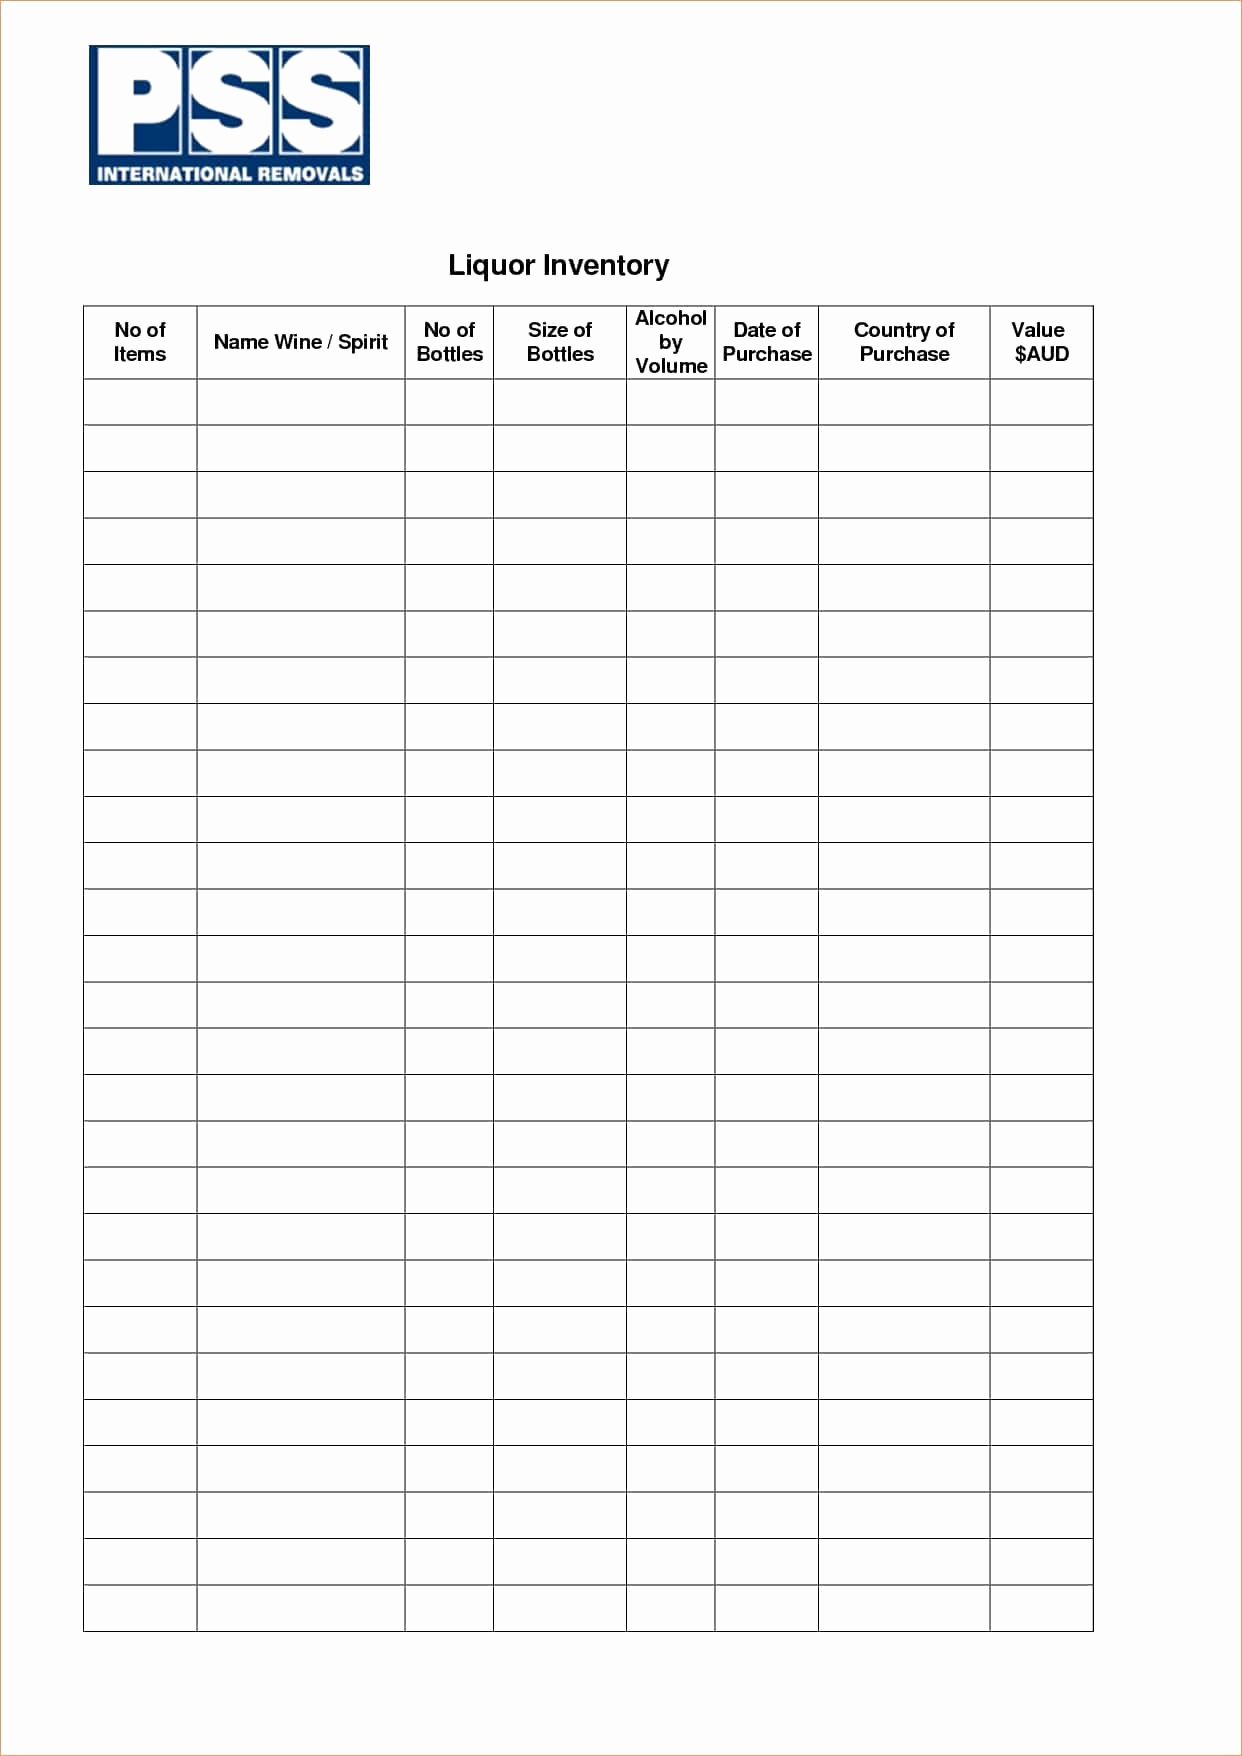 coffee-shop-inventory-spreadsheet-throughout-printable-liquor-inventory-sheets-elegant-coffee